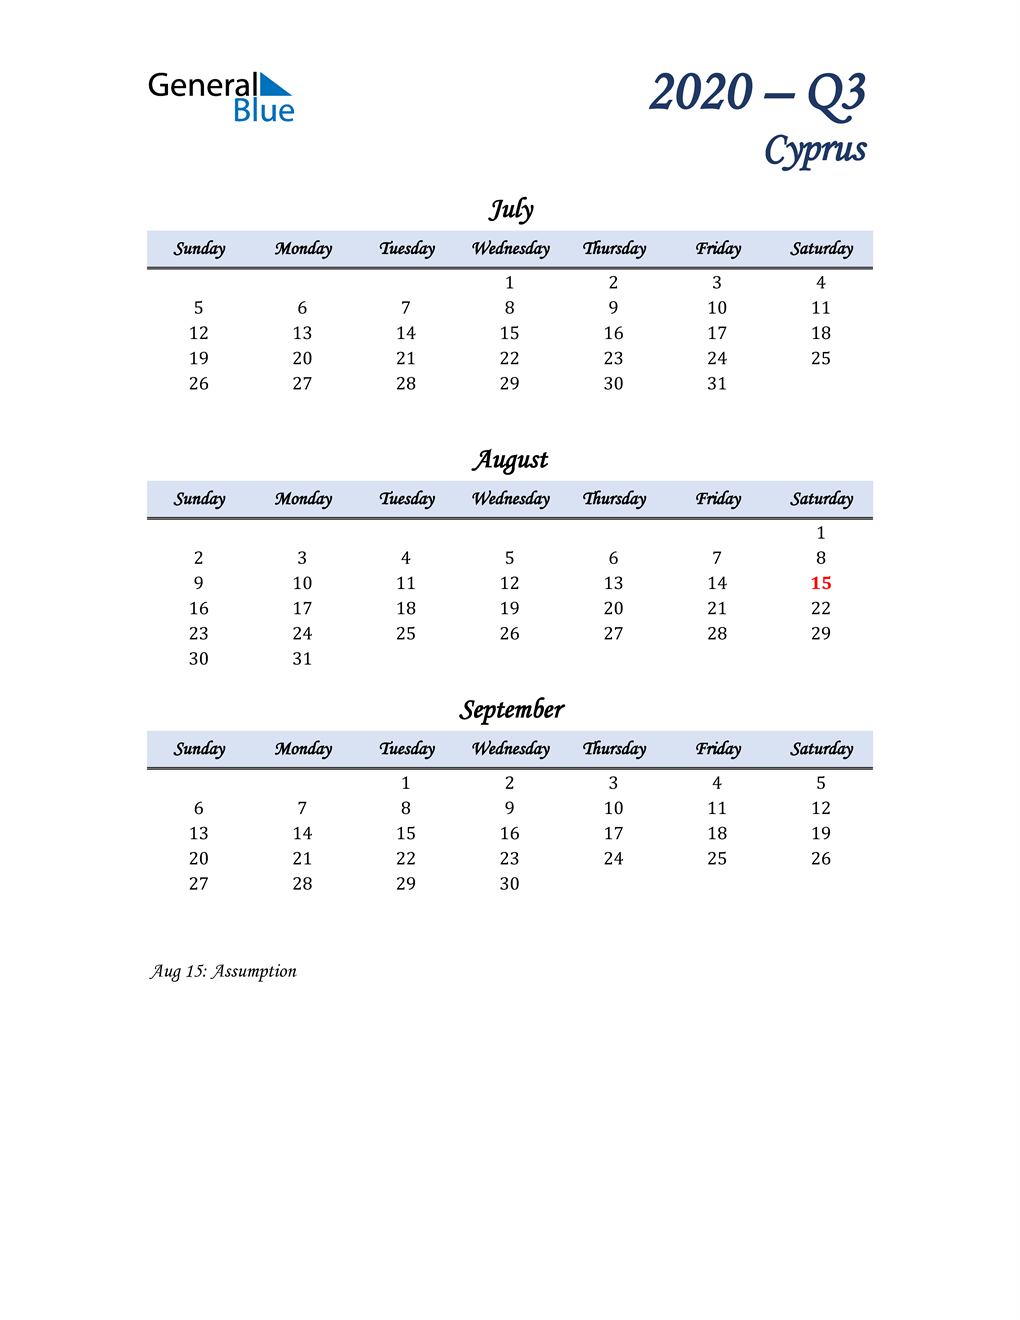  July, August, and September Calendar for Cyprus